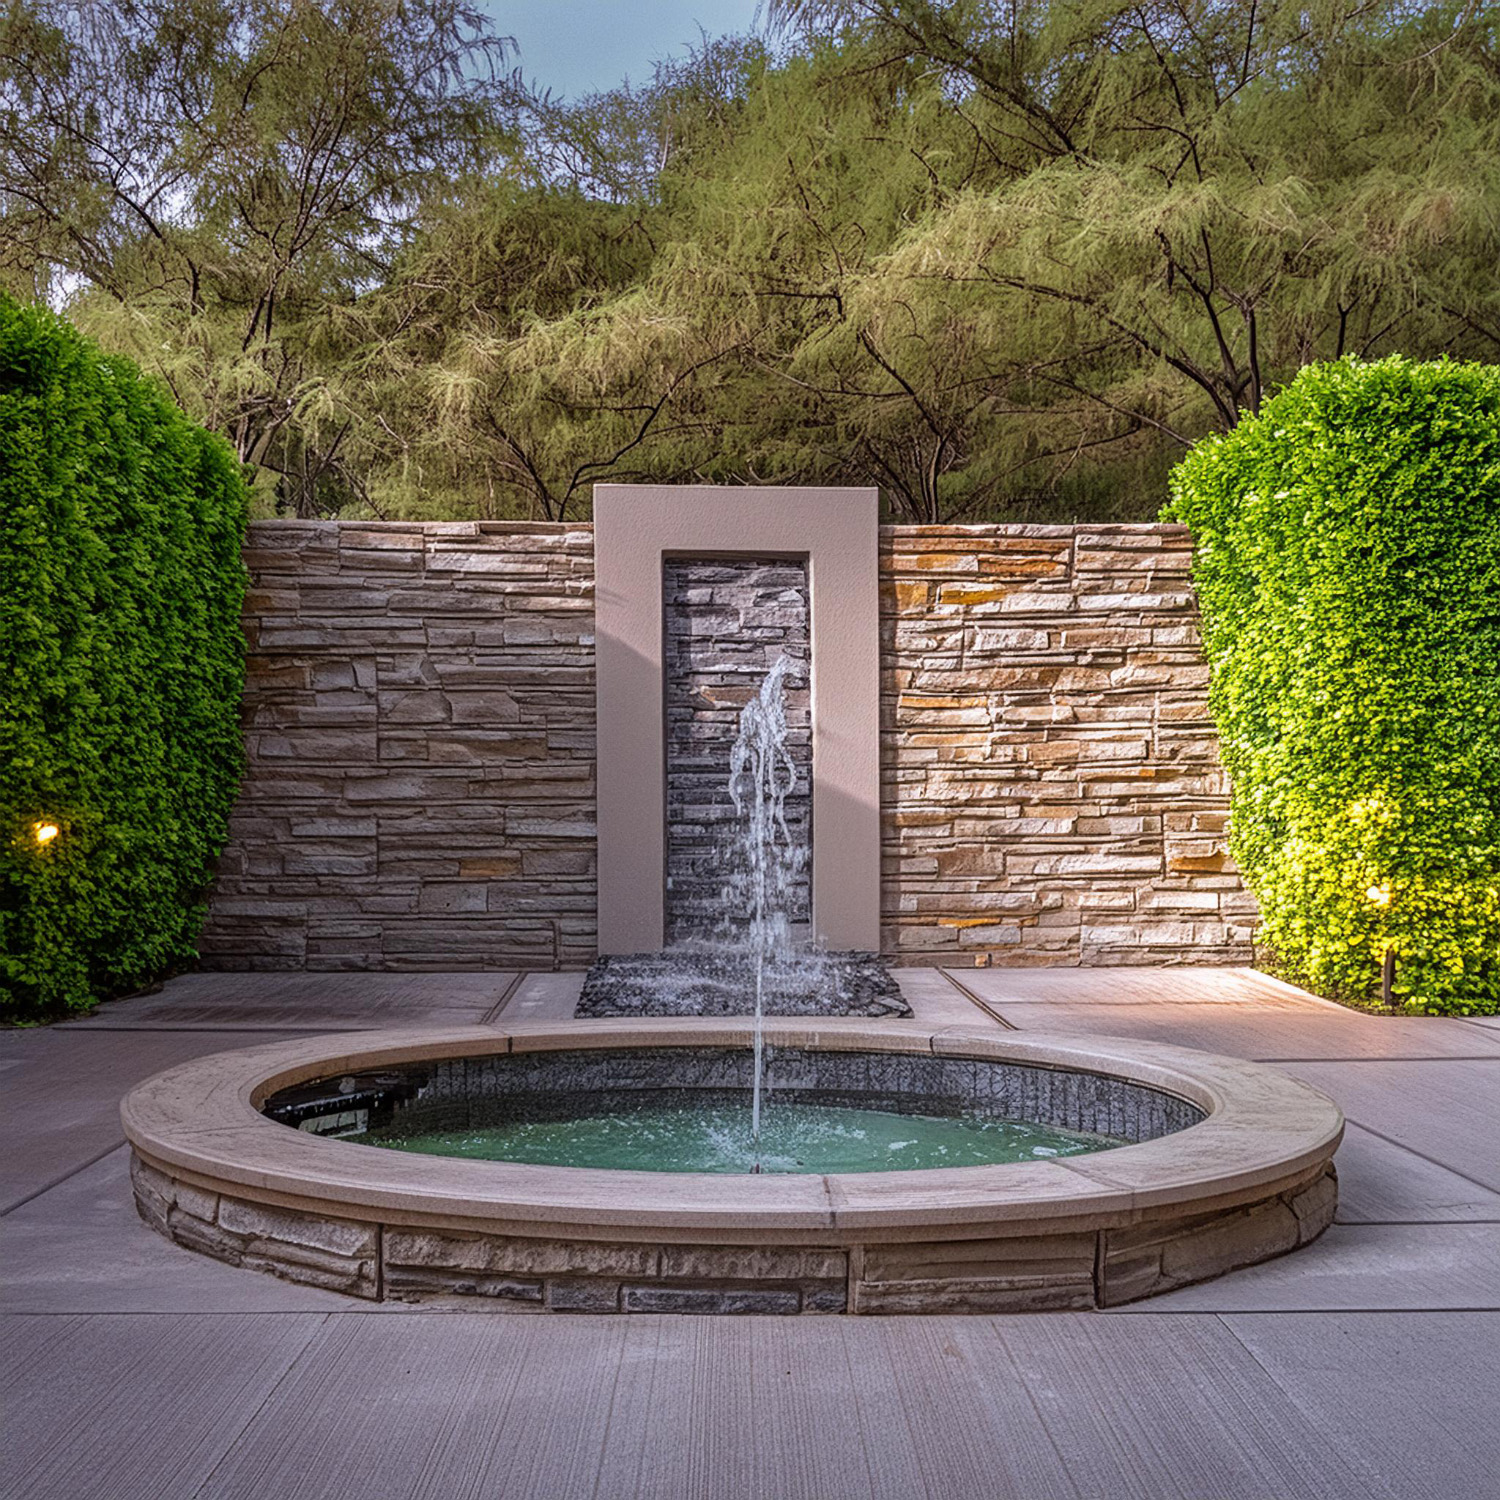 A water feature, fountain or small pond can add quite a bit peace and tranquility to your life.